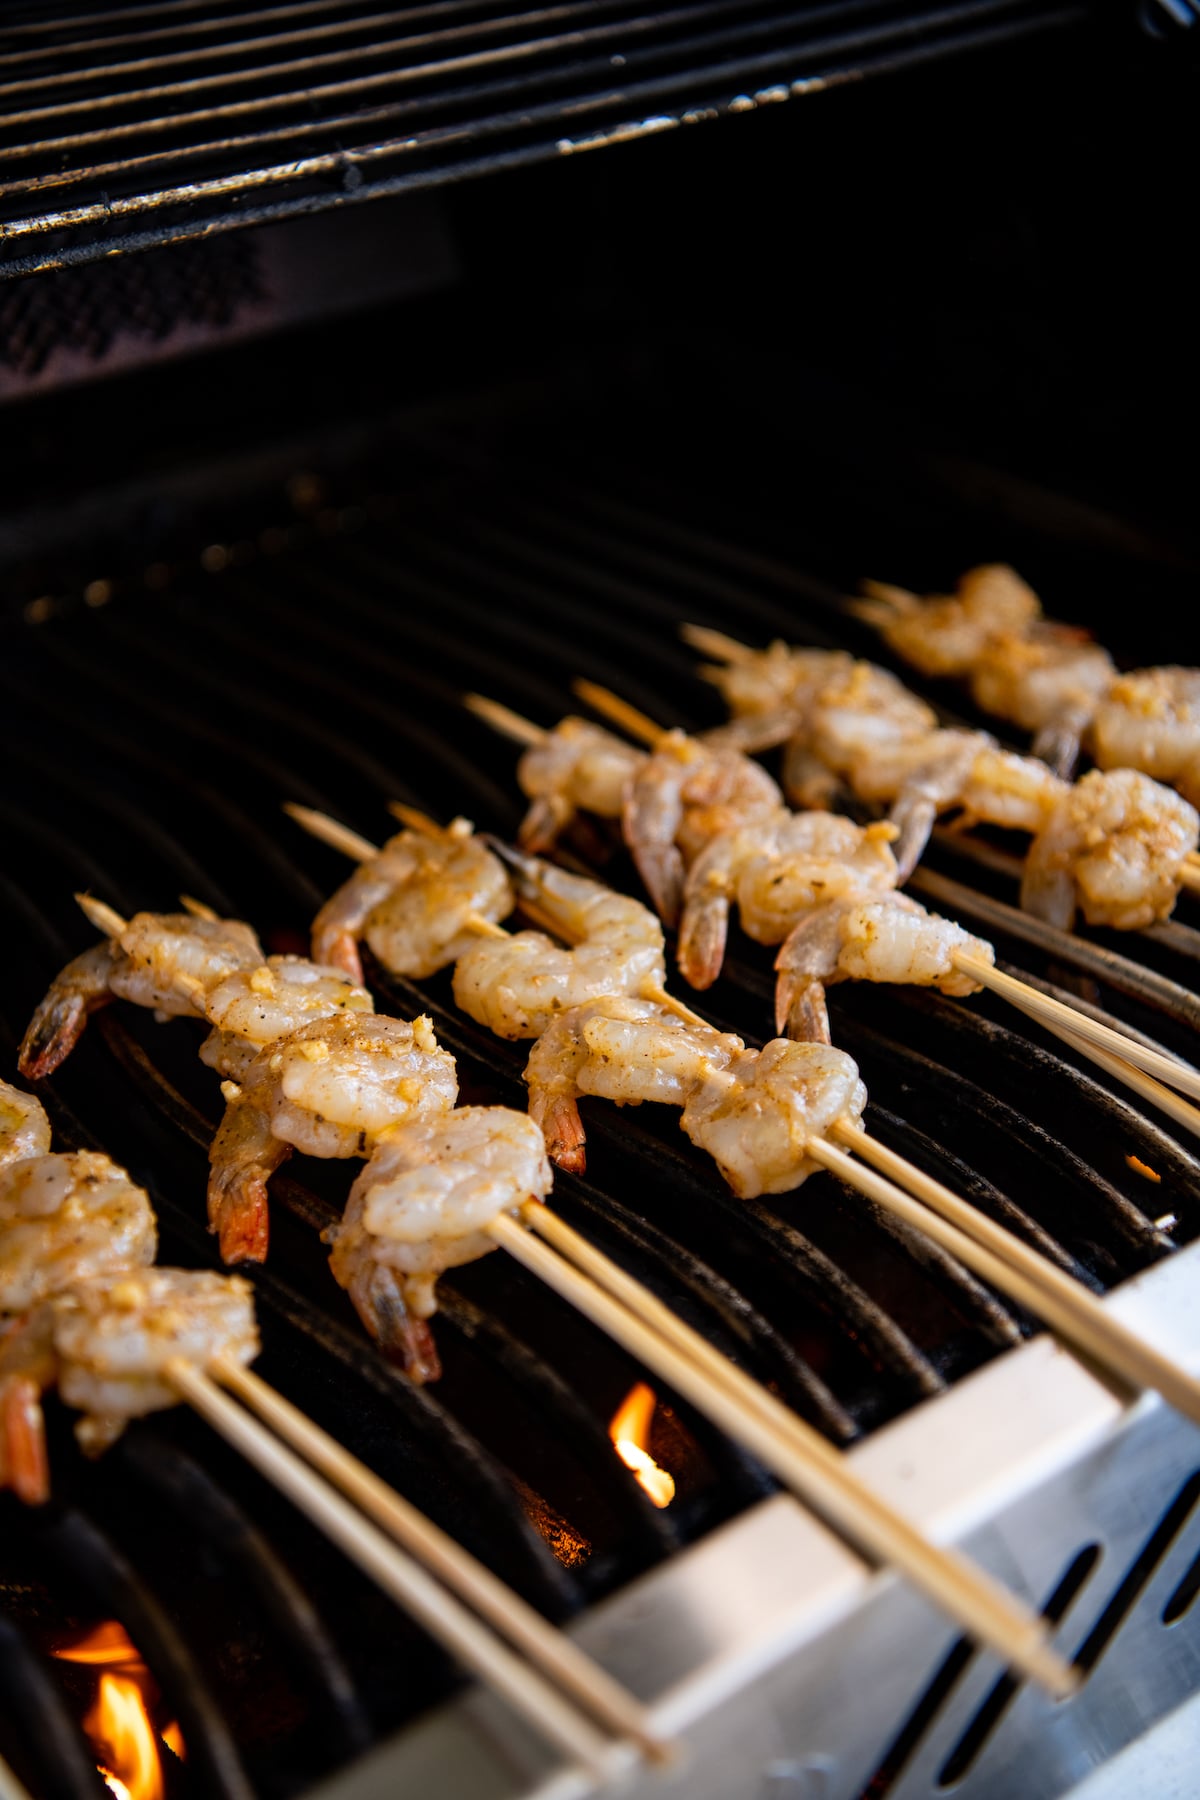 Raw shrimp on skewers on a grill.